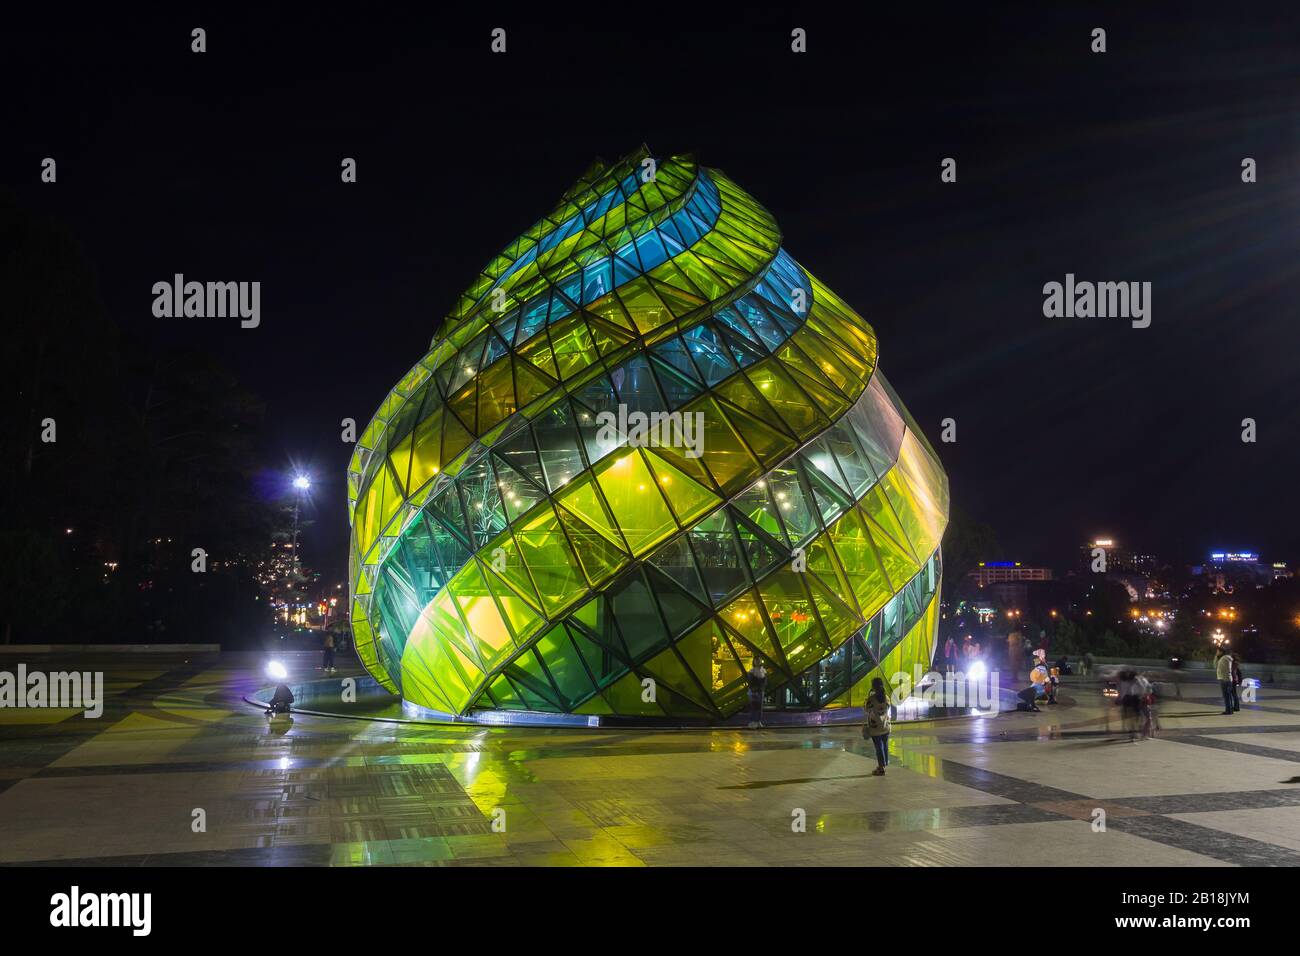 Dalat Glass Pavilion - A glass building in the form of the artichoke flower bud in Lam Vien square in the night in Dalat. Vietnam, Southeast Asia. Stock Photo